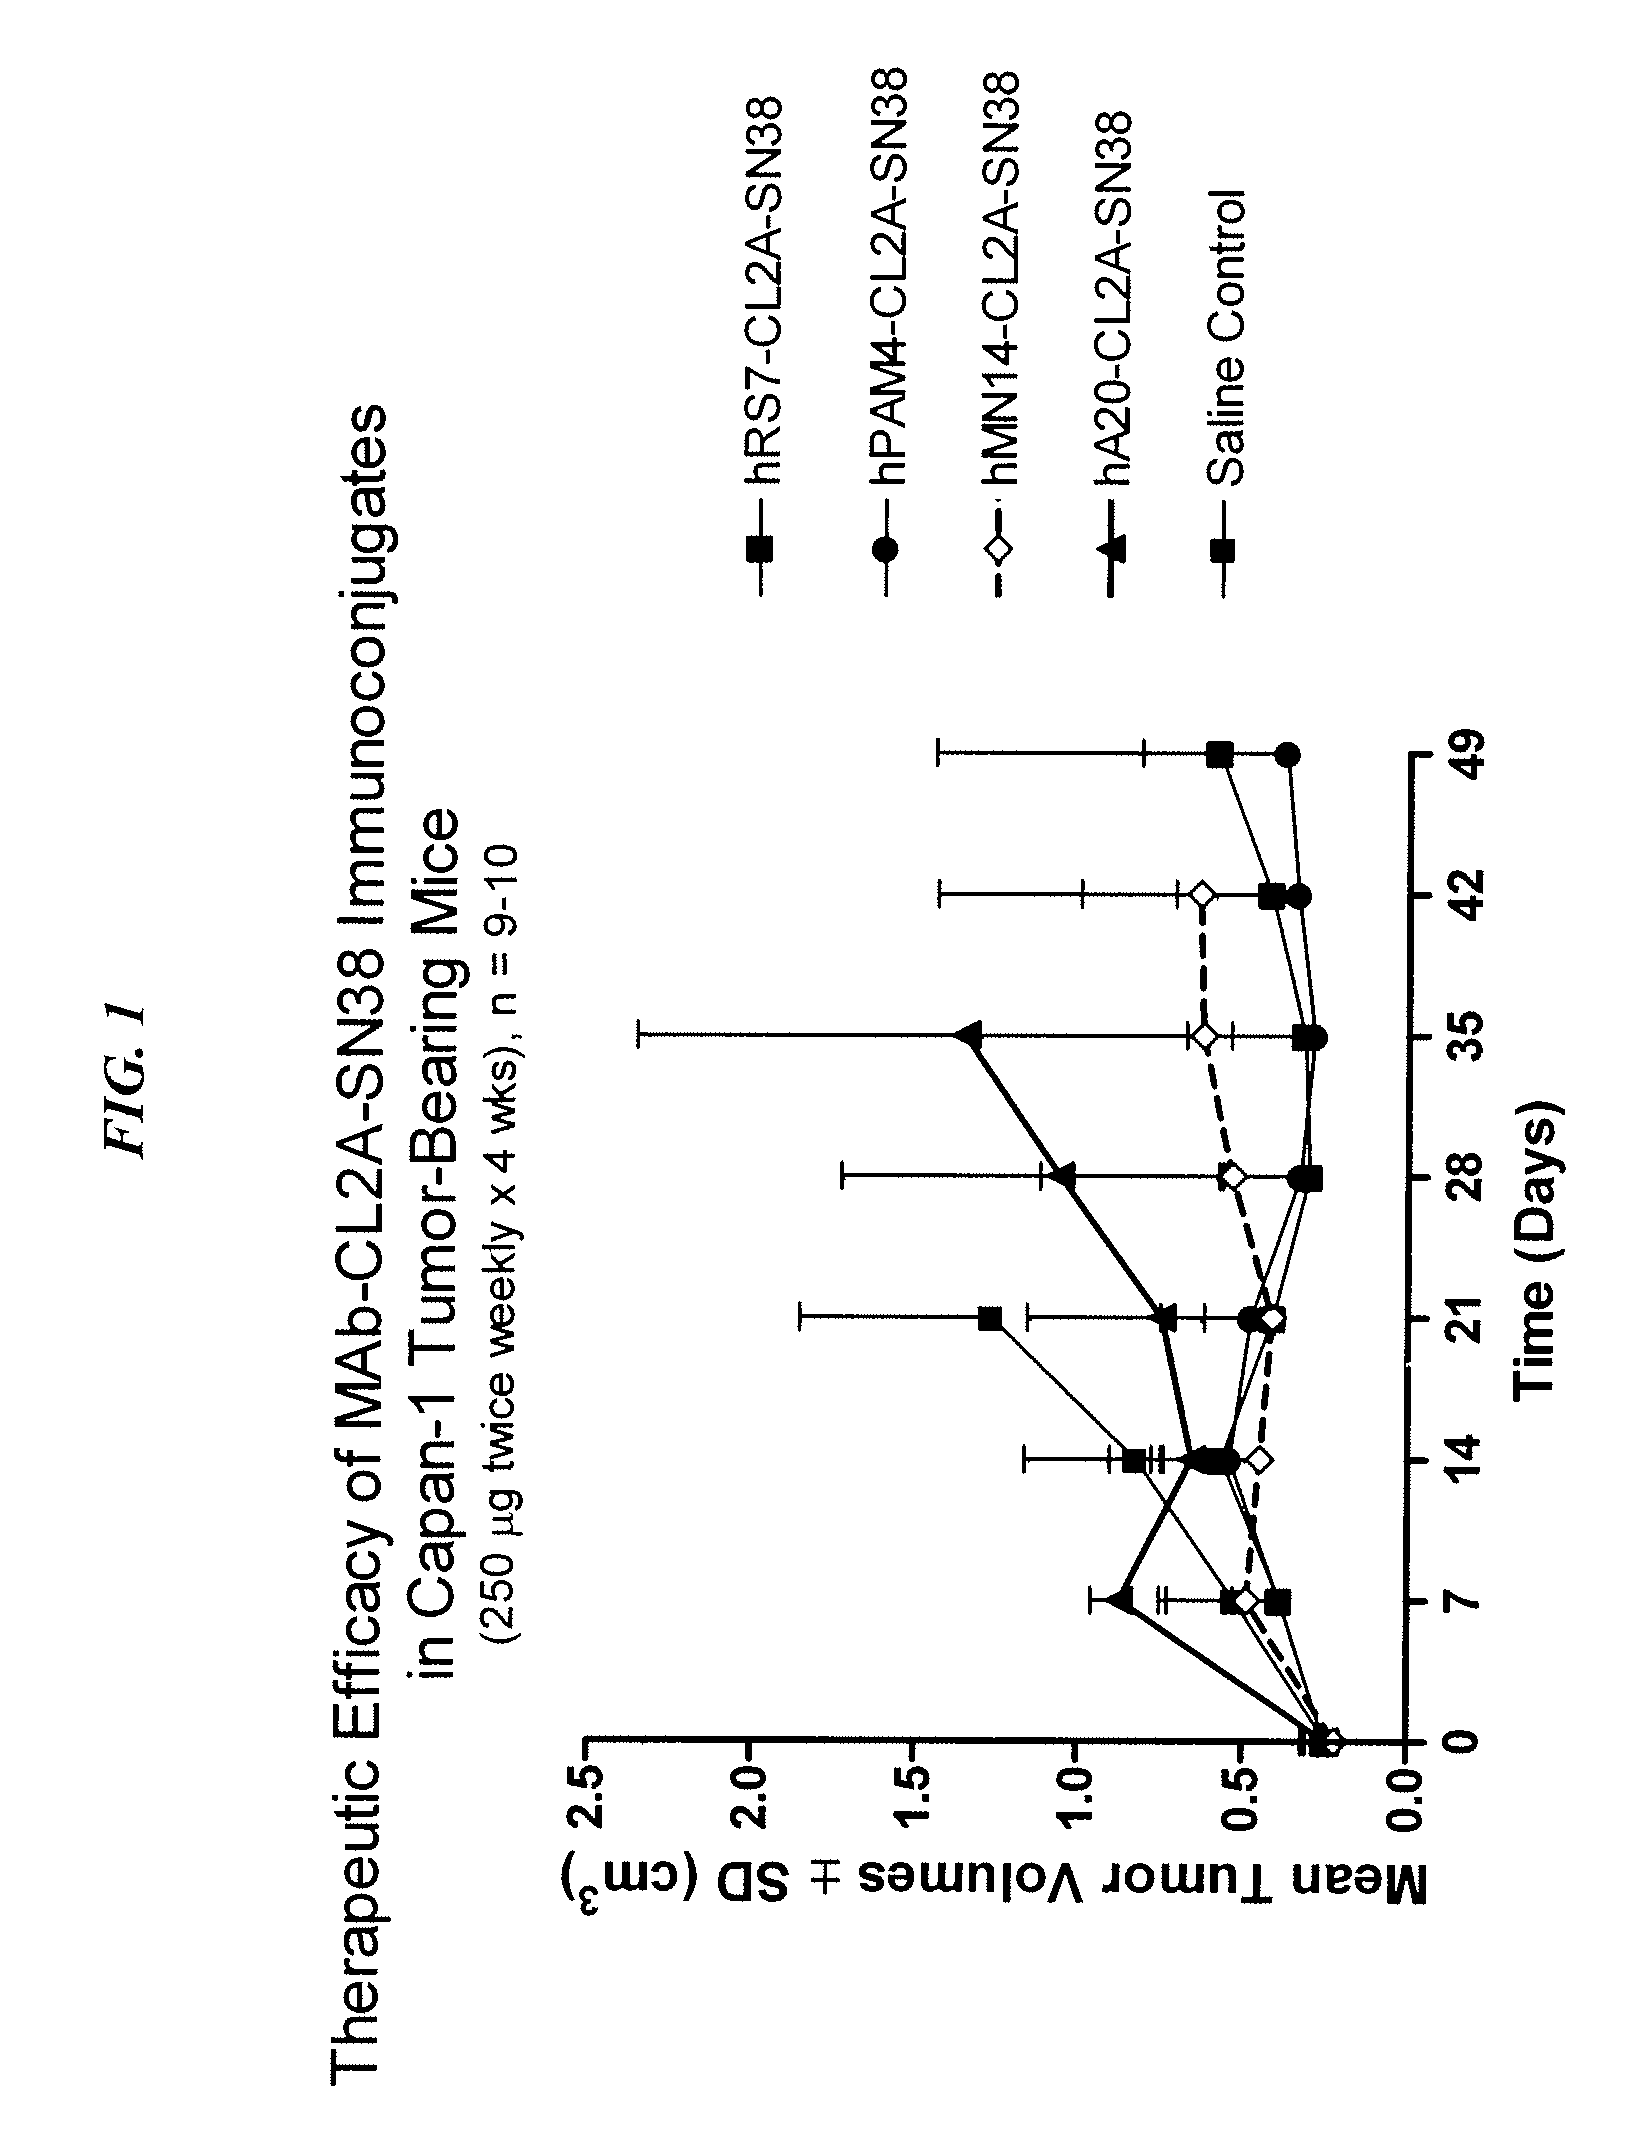 Immunoconjugates with an intracellularly-cleavable linkage